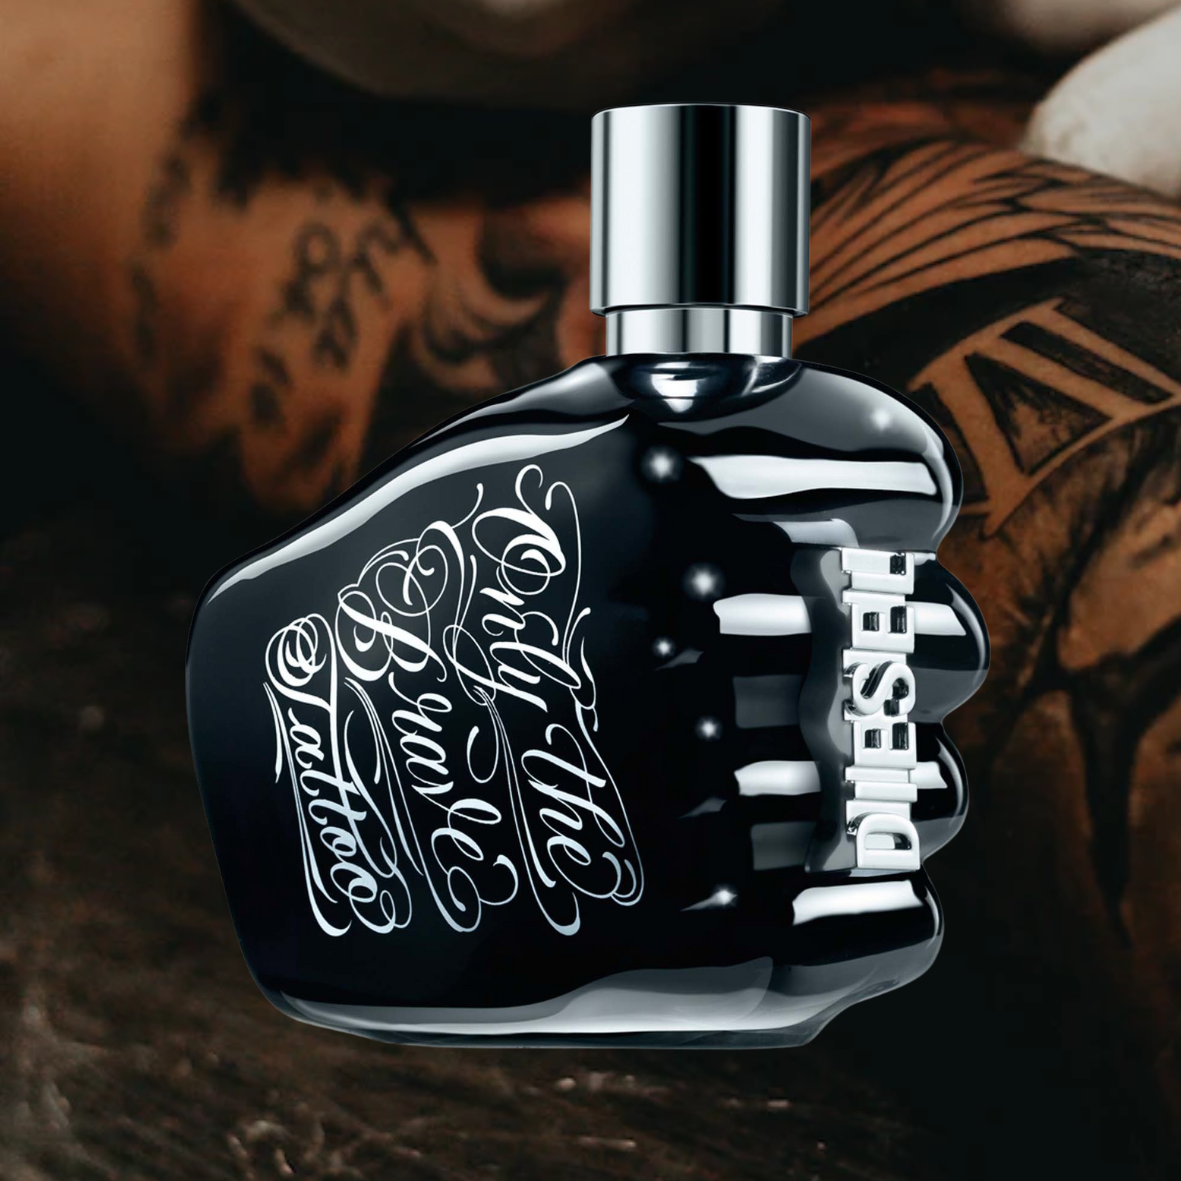 Diesel Only The Brave Tattoo
Best Smoky Tobacco Fragrances